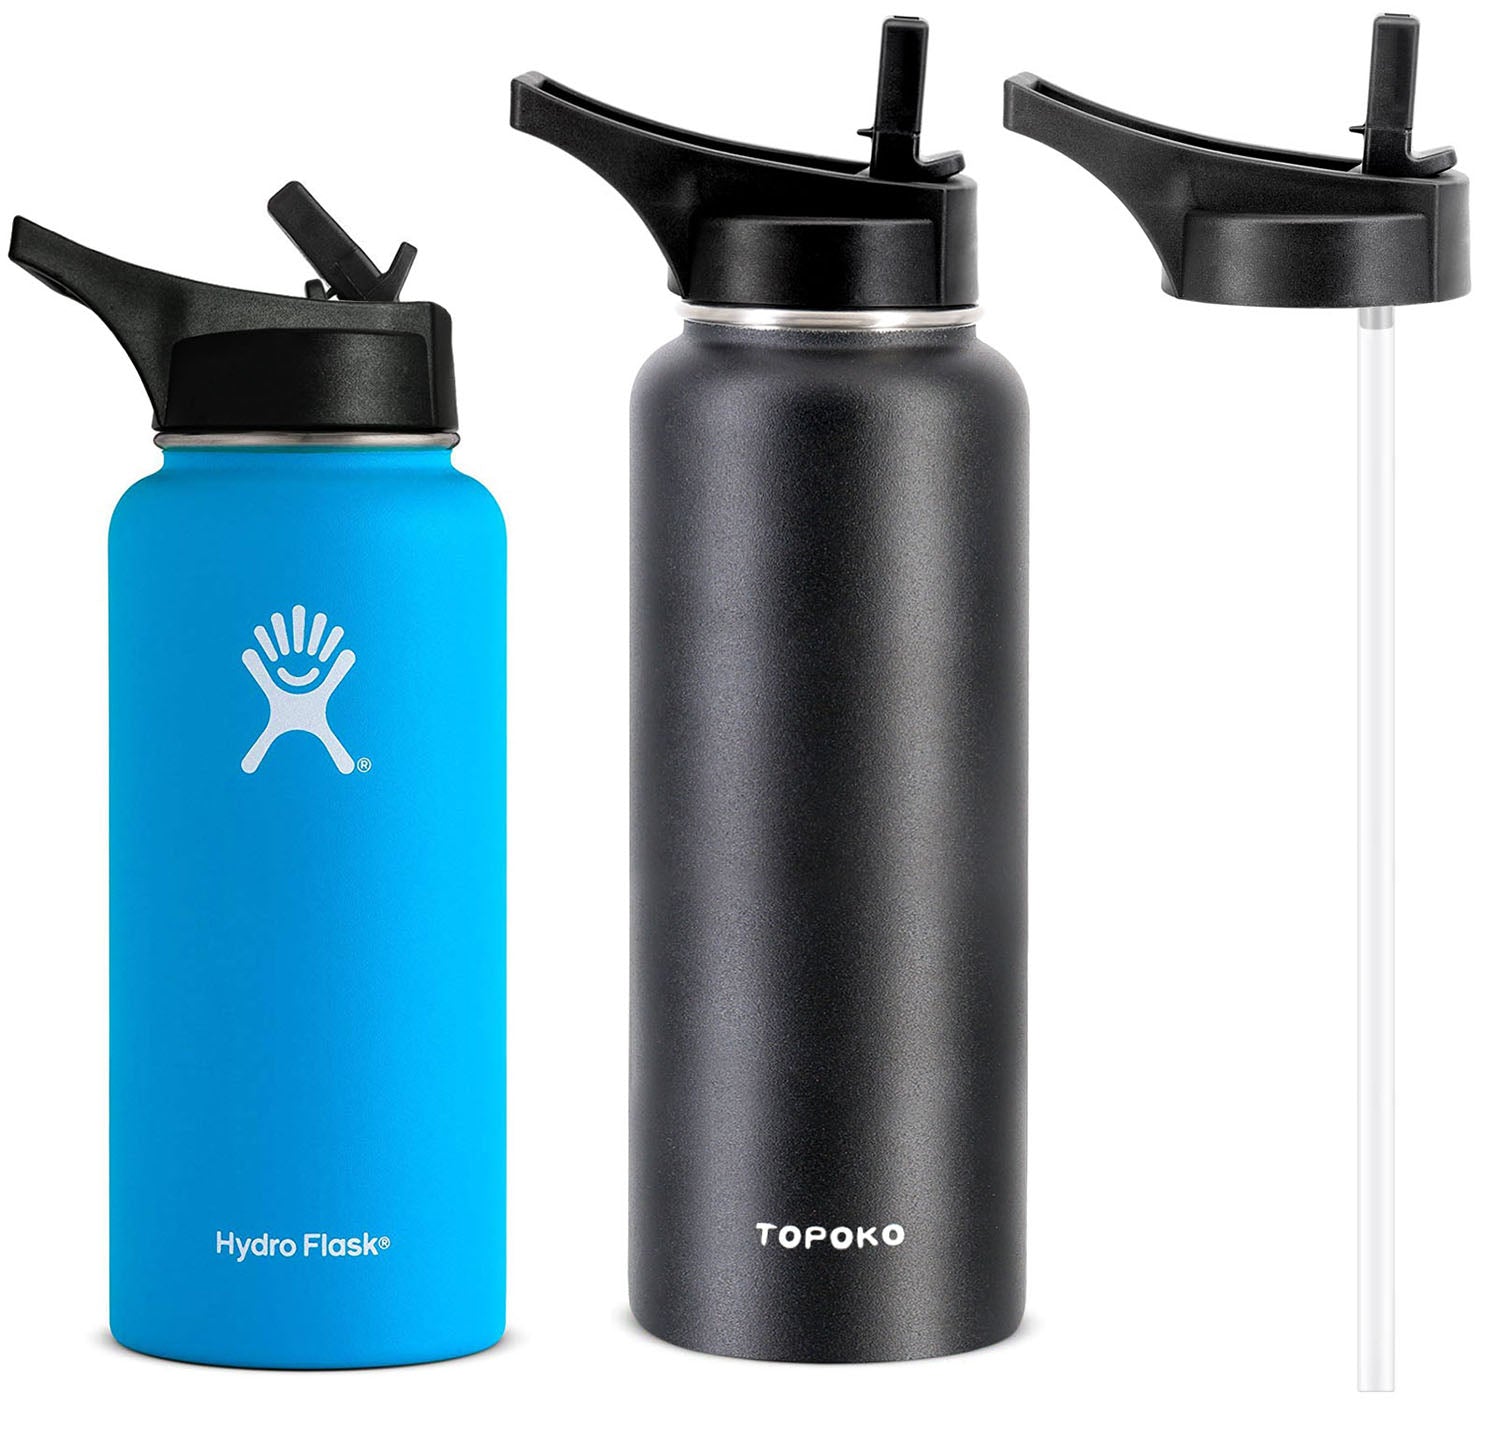 Straw Lid for Hydro Flask Wide Mouth Water Bottle, Extra Long Handle Replacement Straw Lid Set for Insulated Bottle with 2.2" Mouth. 2 Straws and 2 Brushes, BPA-Free and Leak Proof.